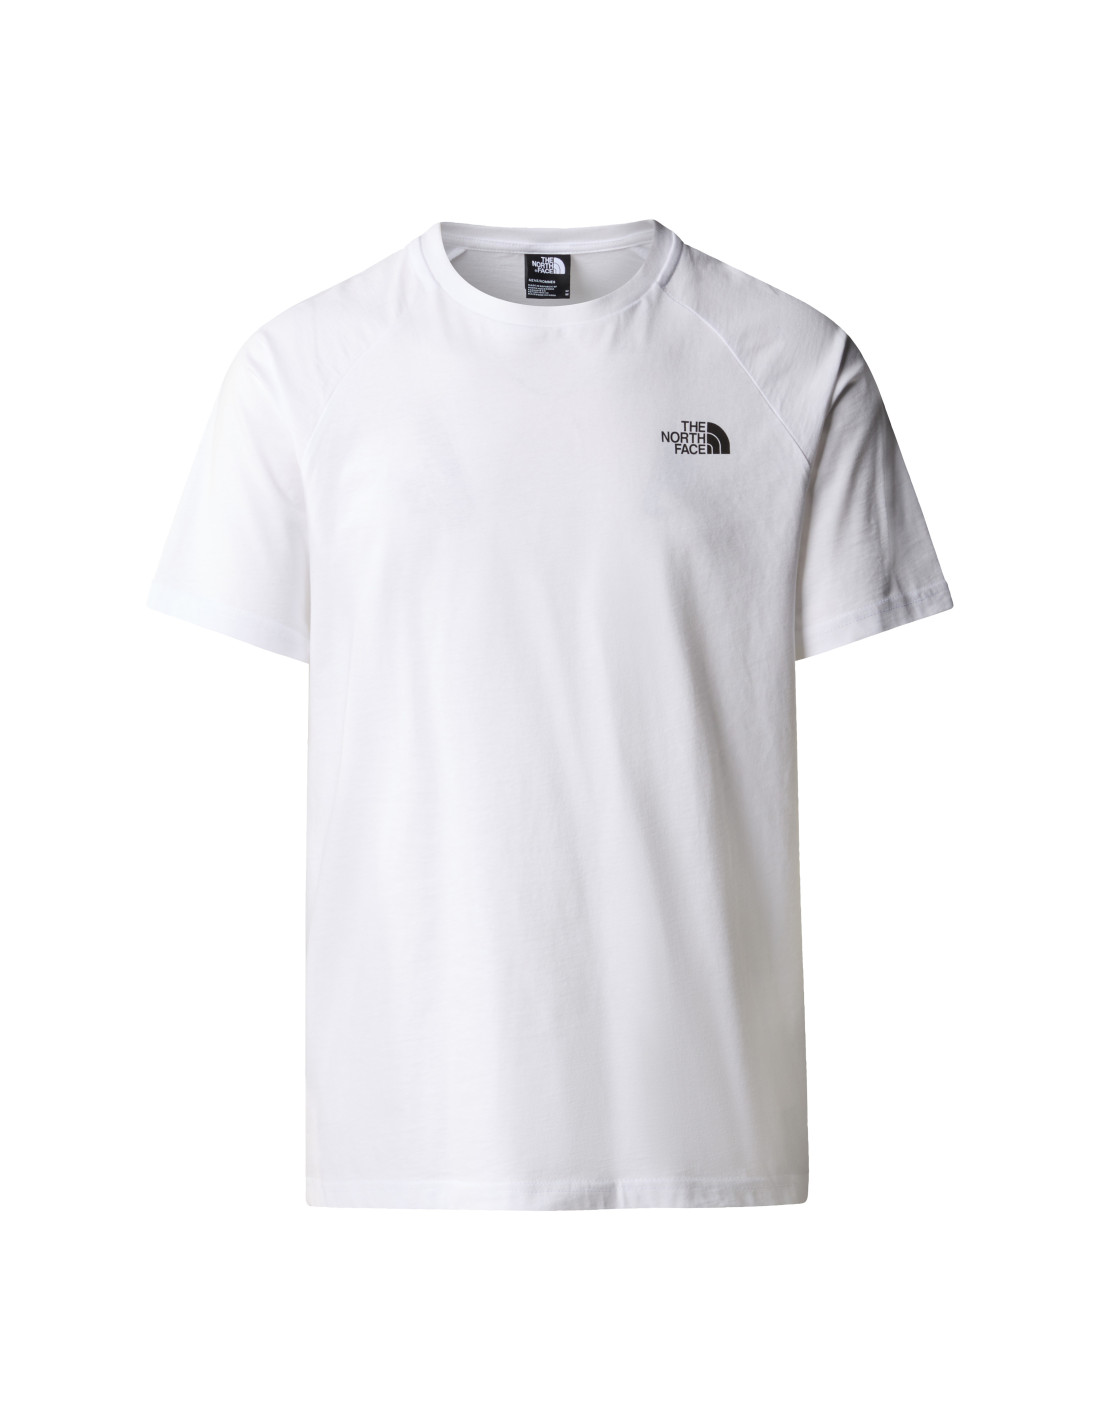 M S S NORTH FACES TEE